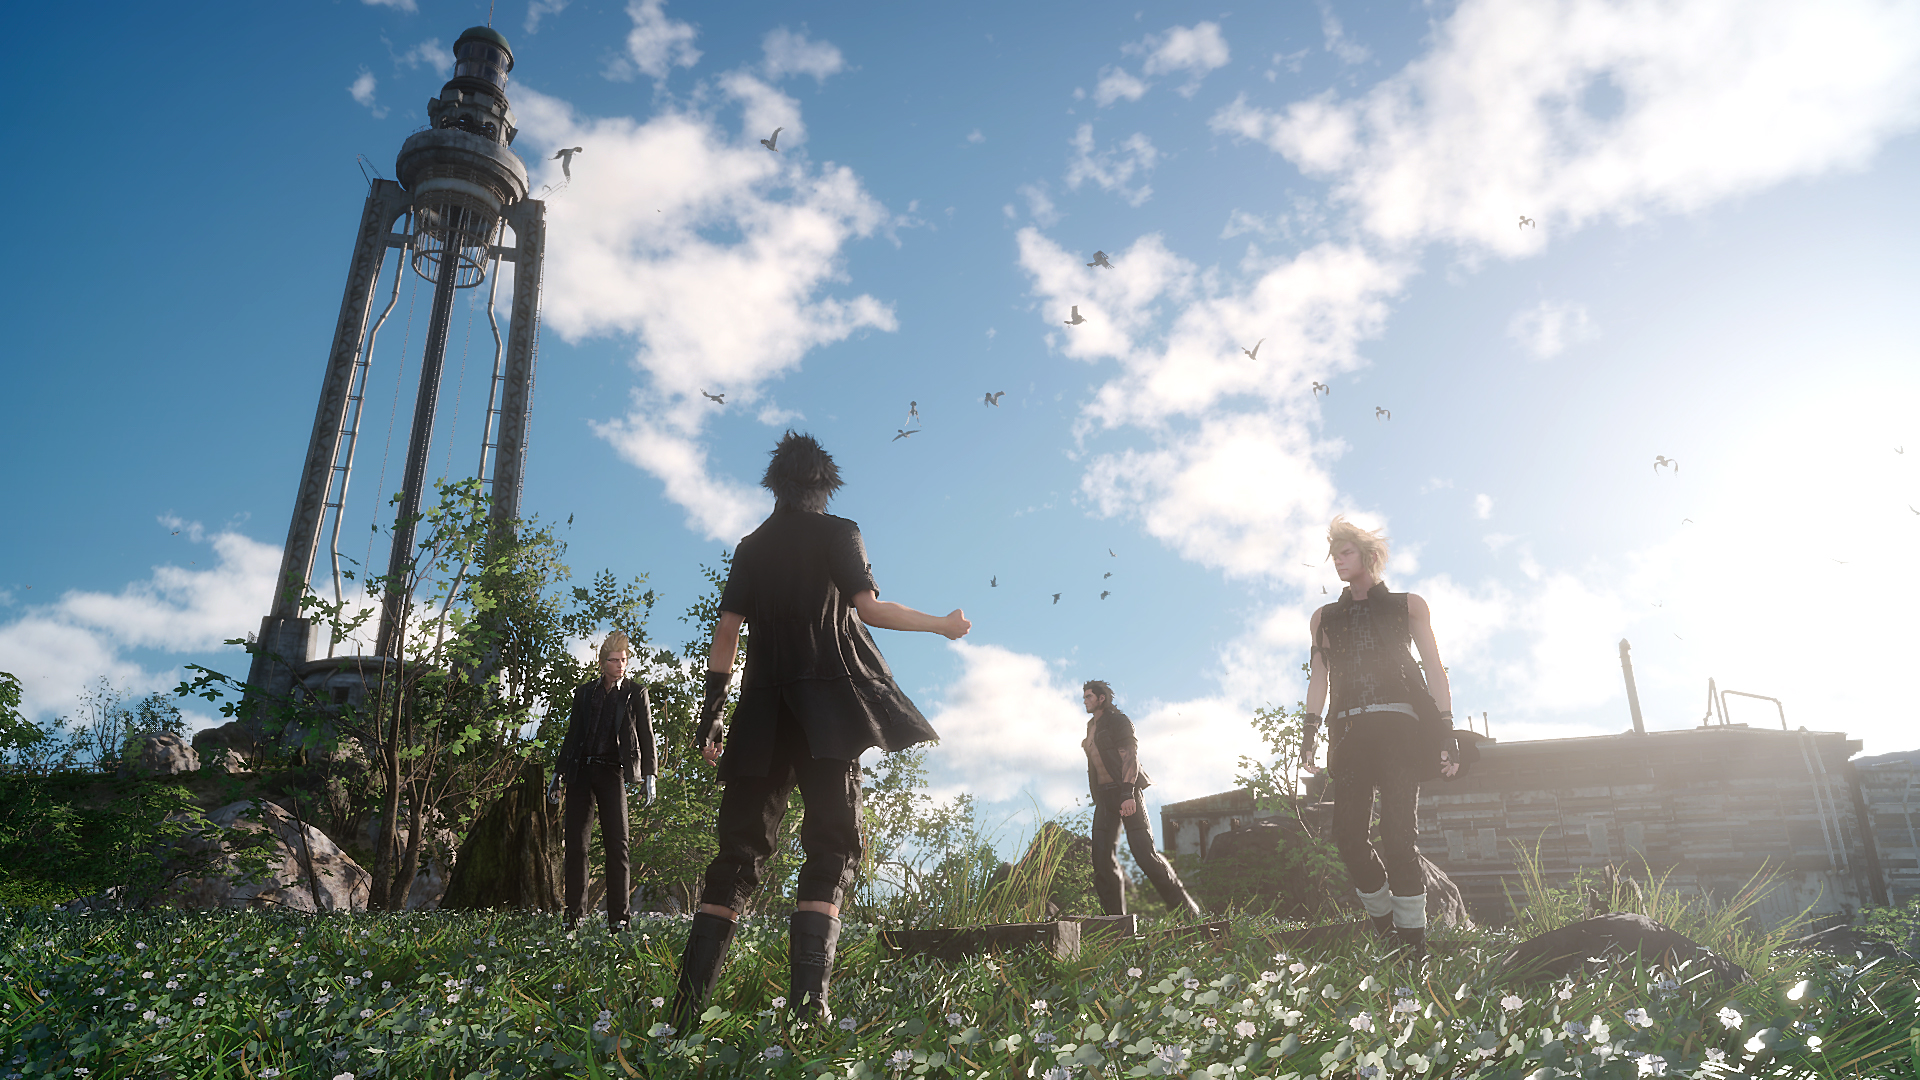 Final Fantasy Xv Wallpapers Video Game Hq Final Fantasy Xv Pictures 4k Wallpapers 19